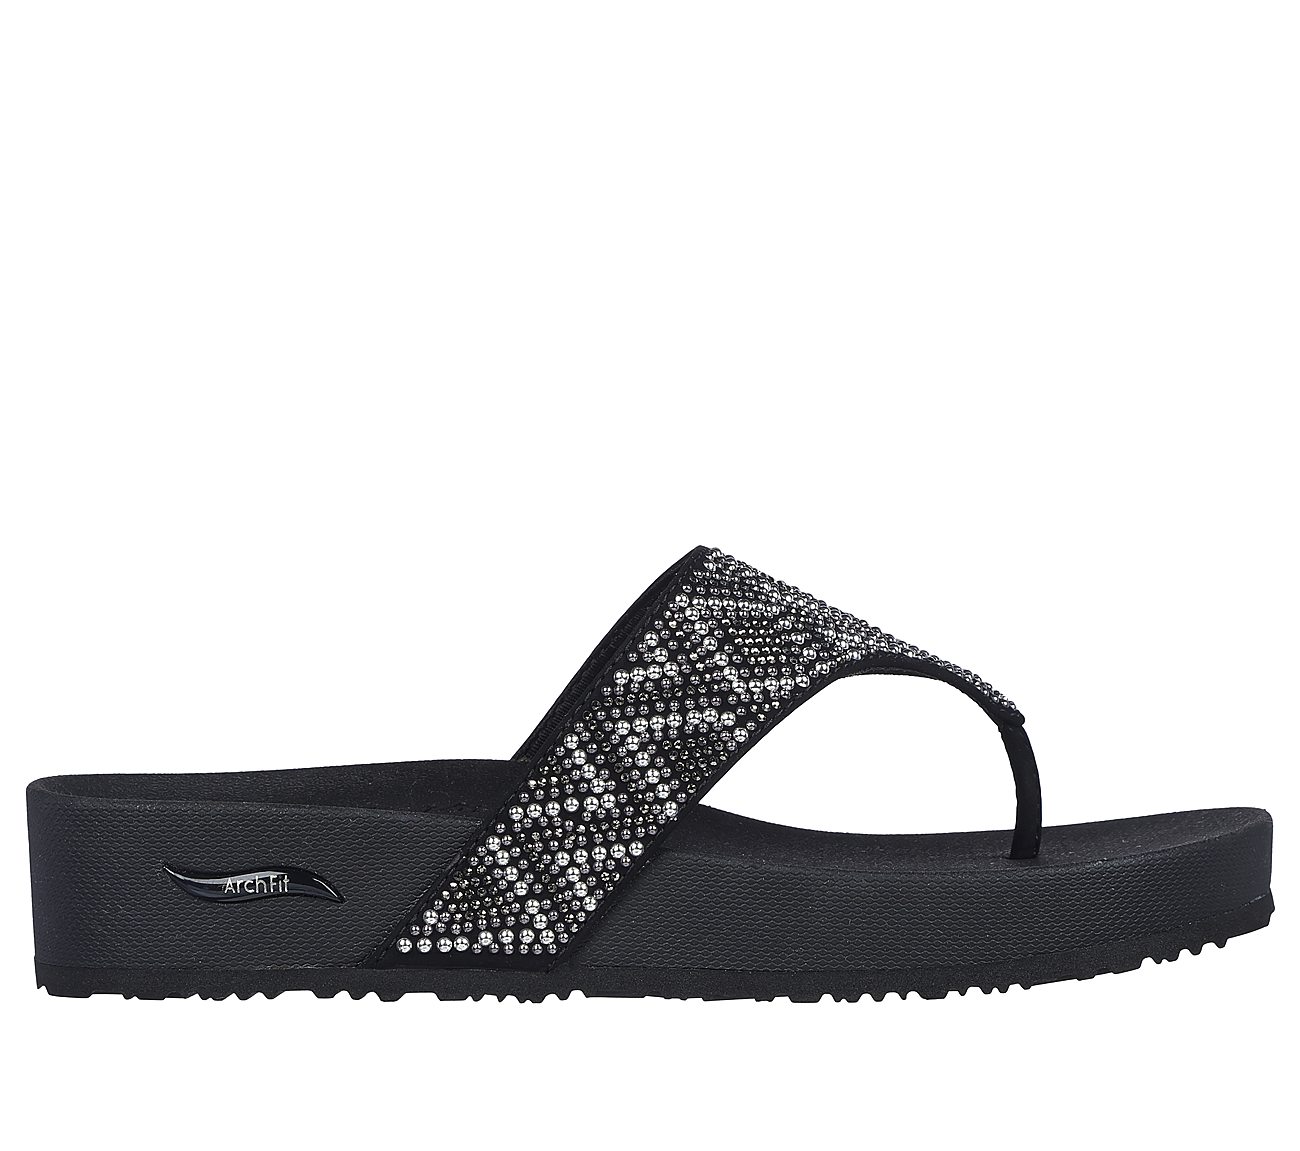 ARCH FIT VINYASA, BBBBLACK Footwear Lateral View